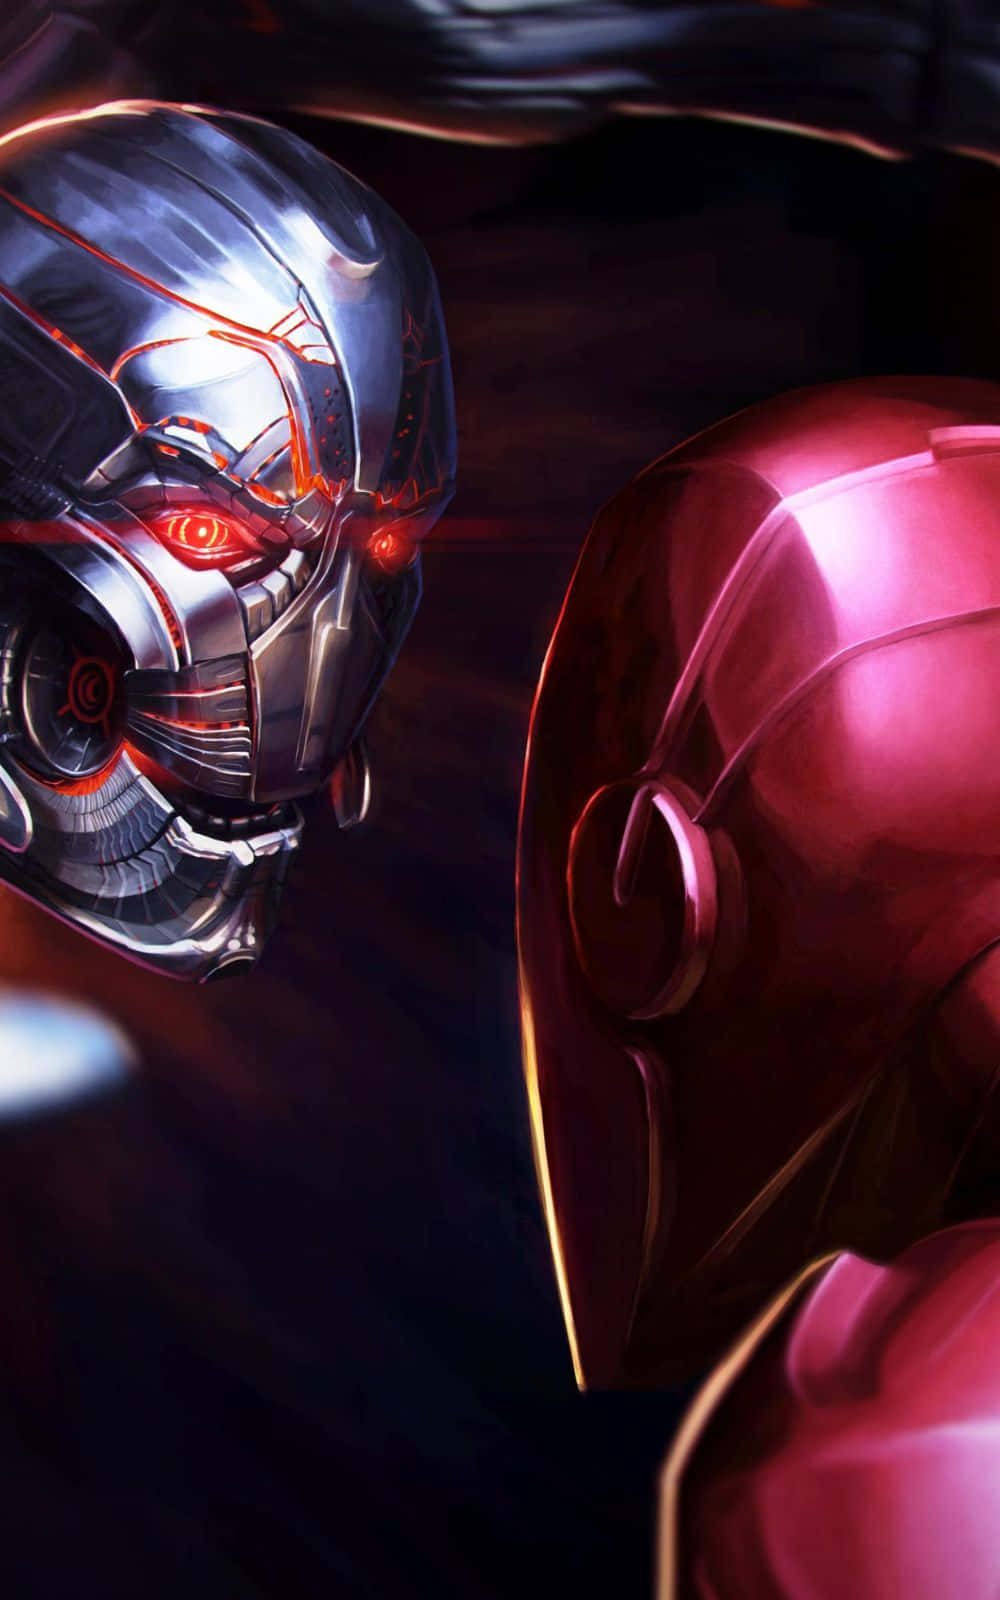 Iron Man and Ultron clash in epic battle of man and machine Wallpaper